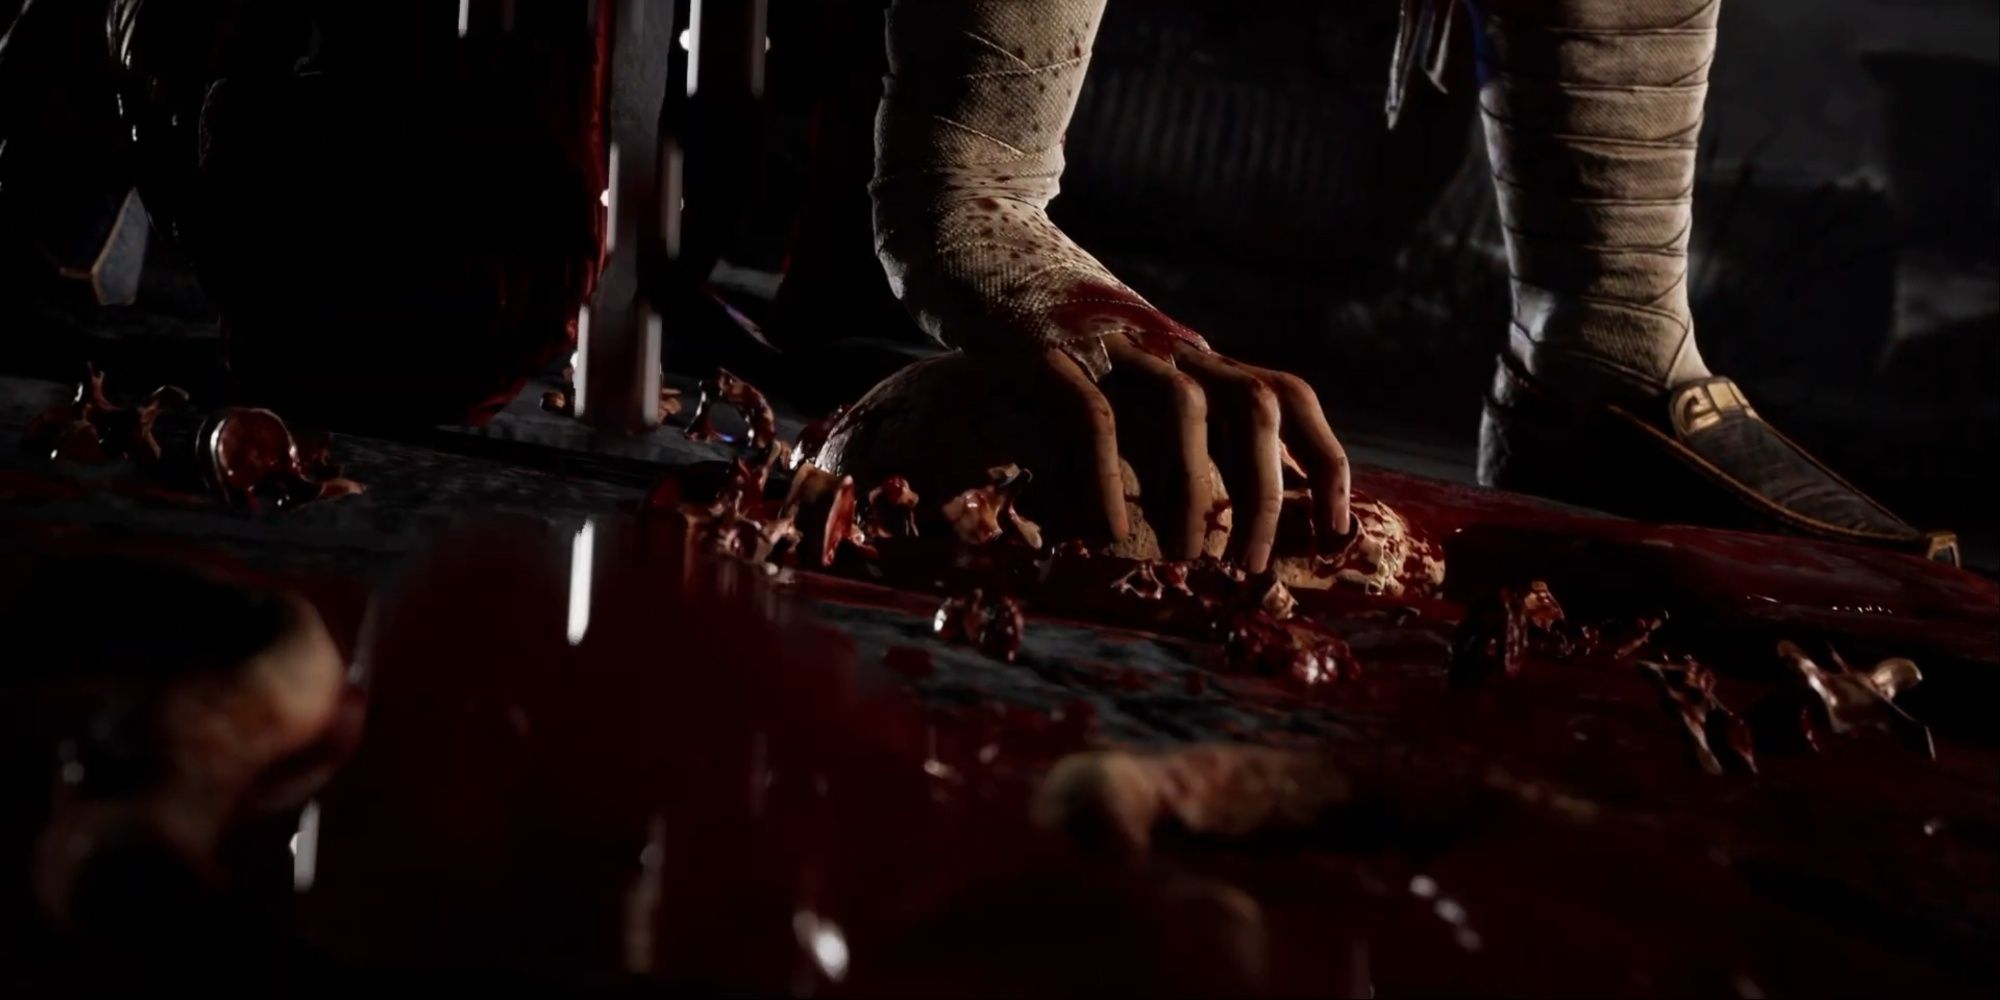 A shot of Liu Kang's bloody hand holding down the smushed head on the arena ground after completing the fatality.